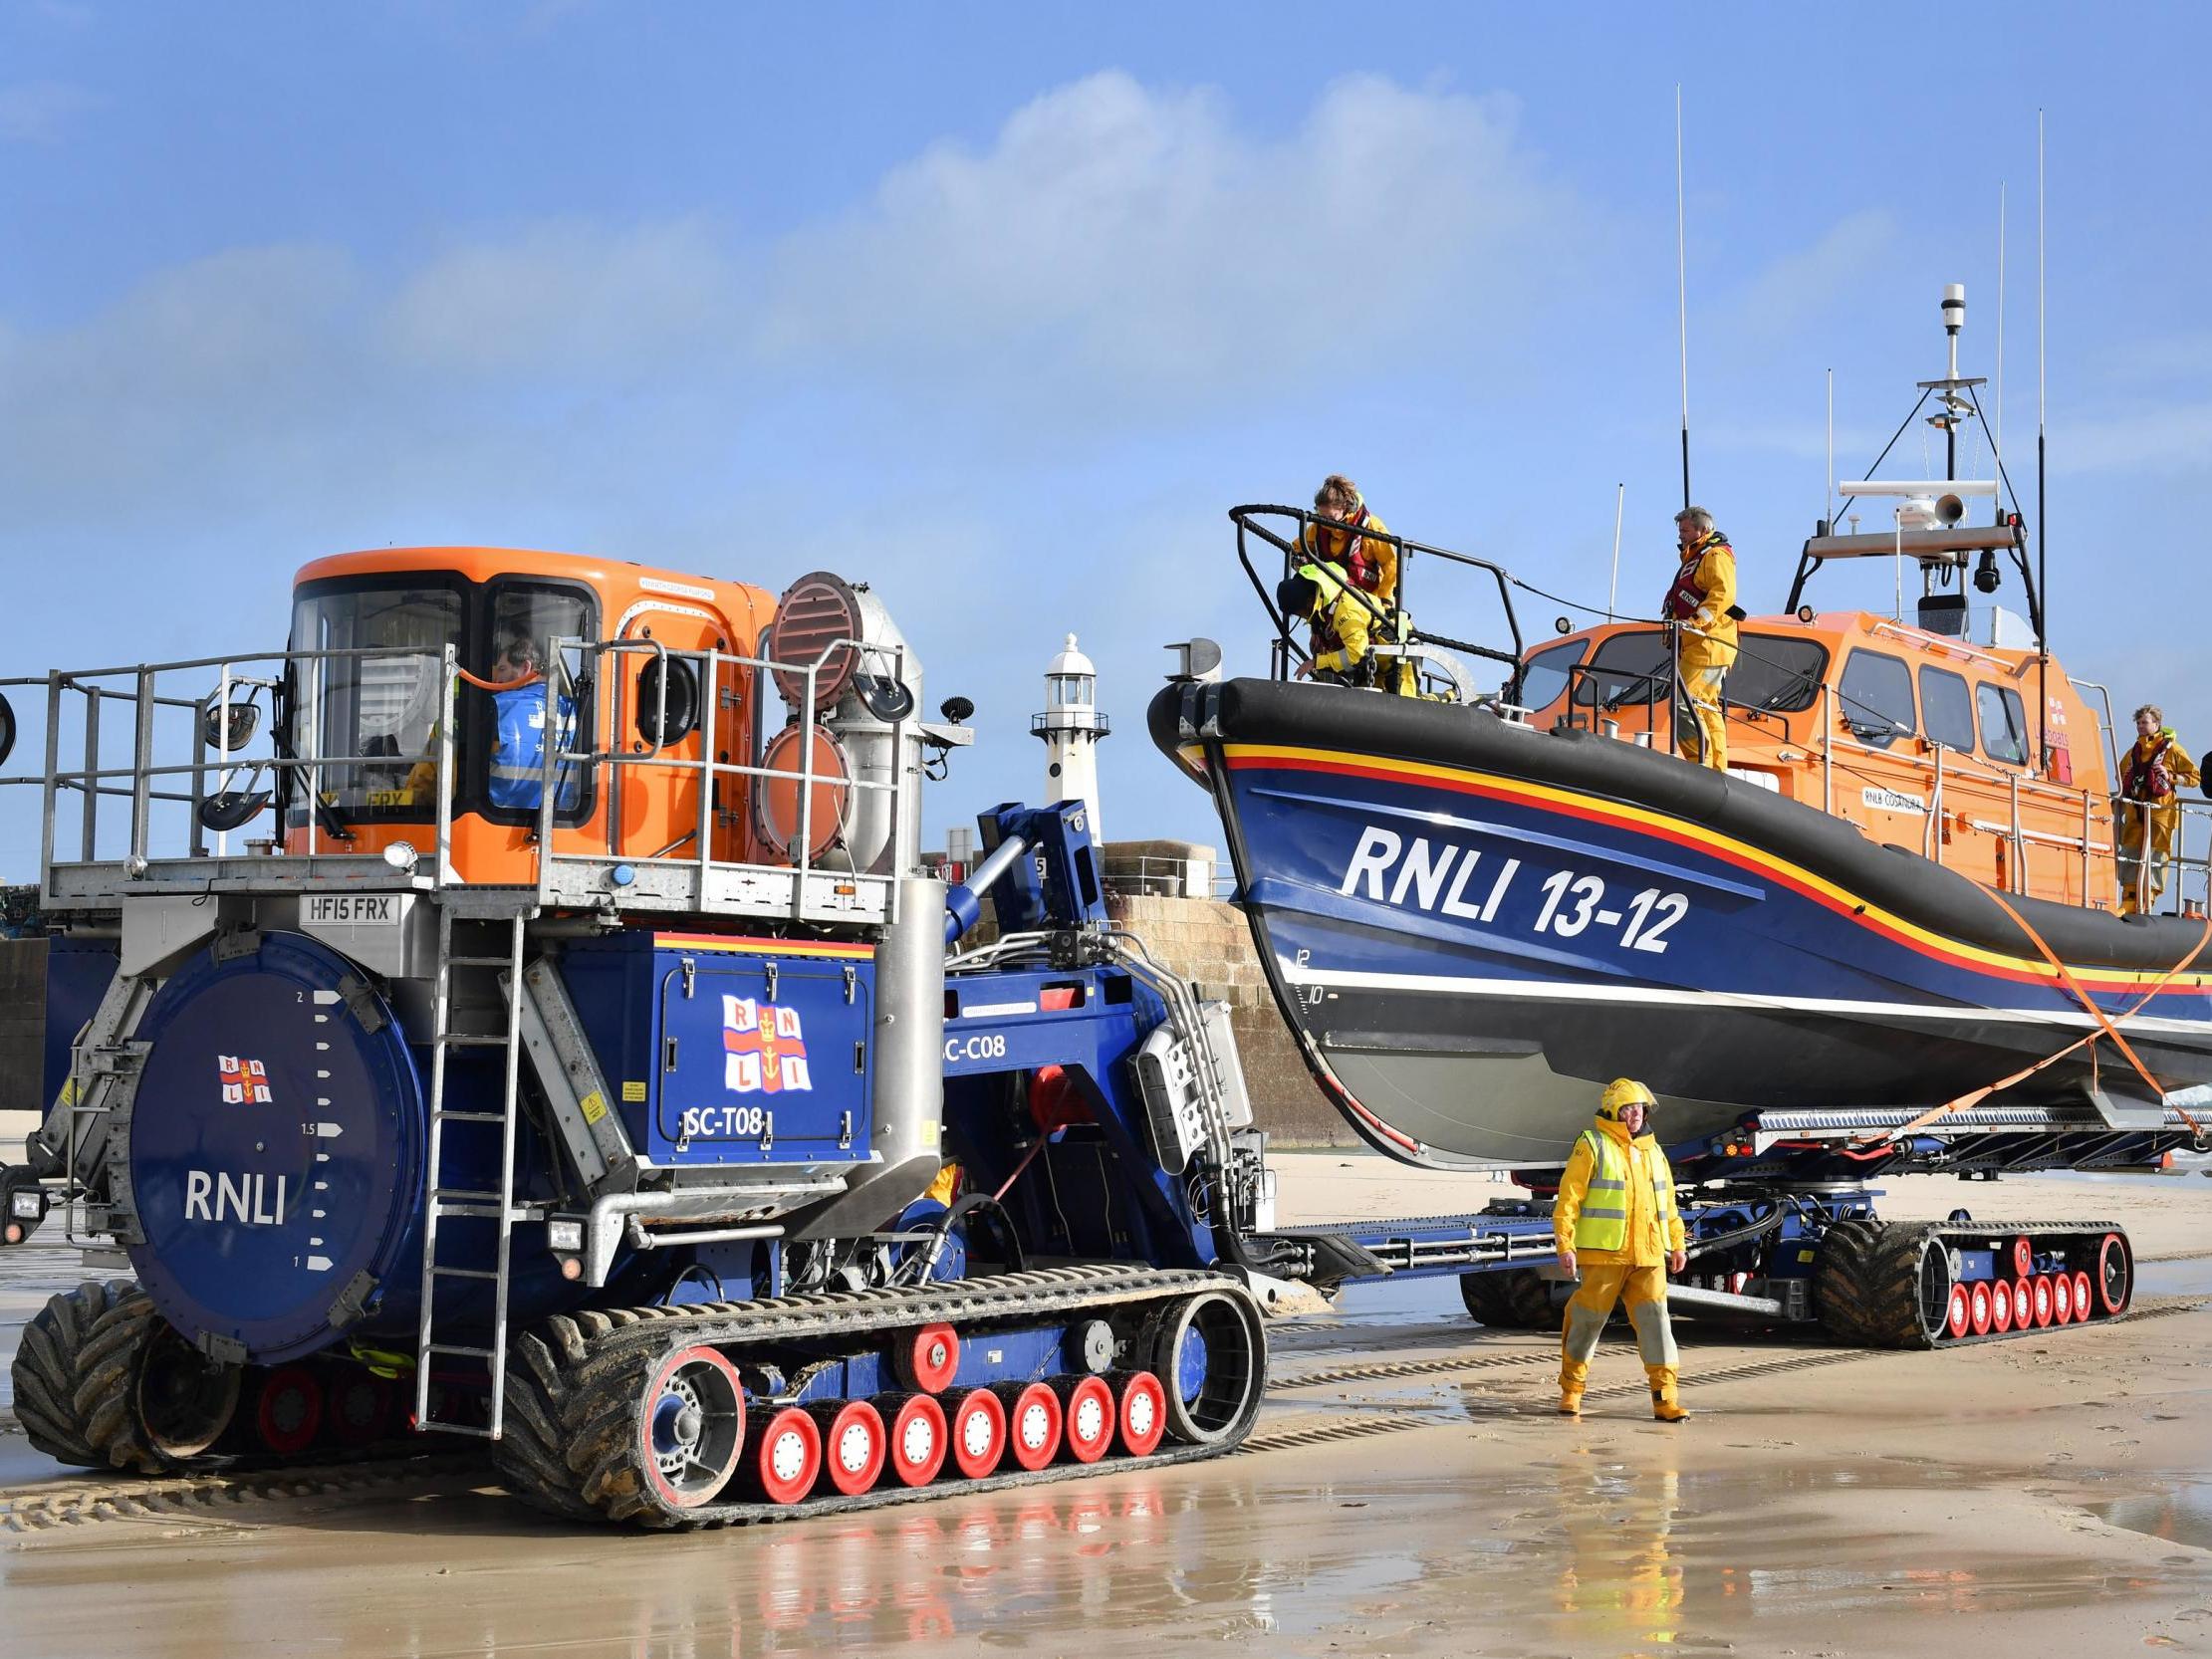 The RNLI has decided to furlough one third of its staff in the wake of the coronavirus crisis.